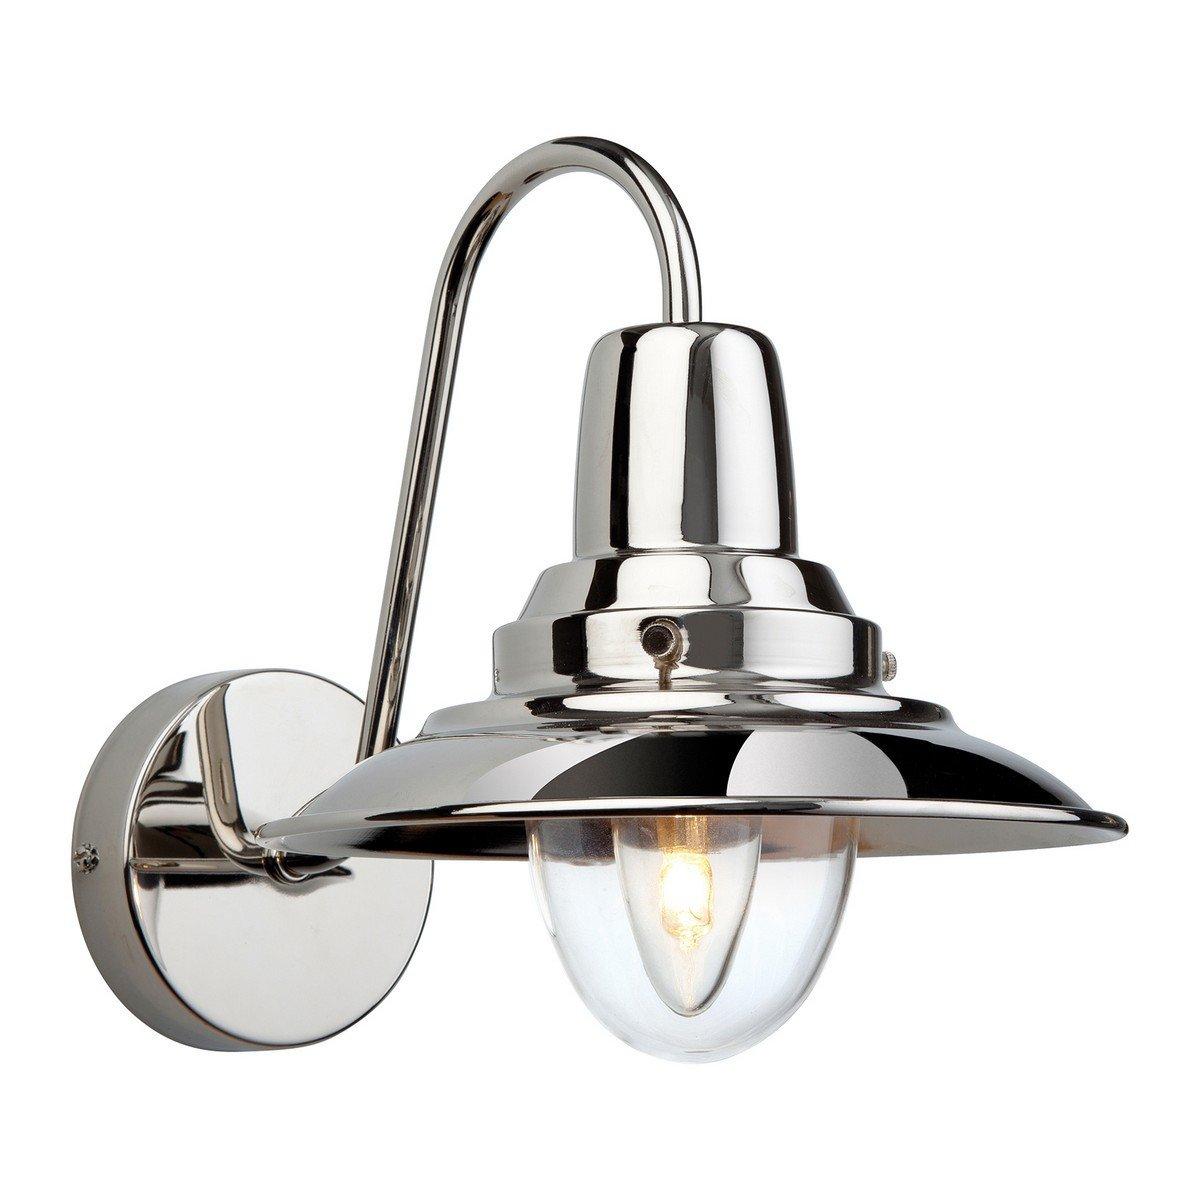 Fisherman 1 Light Indoor Dome Wall Light Chrome Clear Glass E14